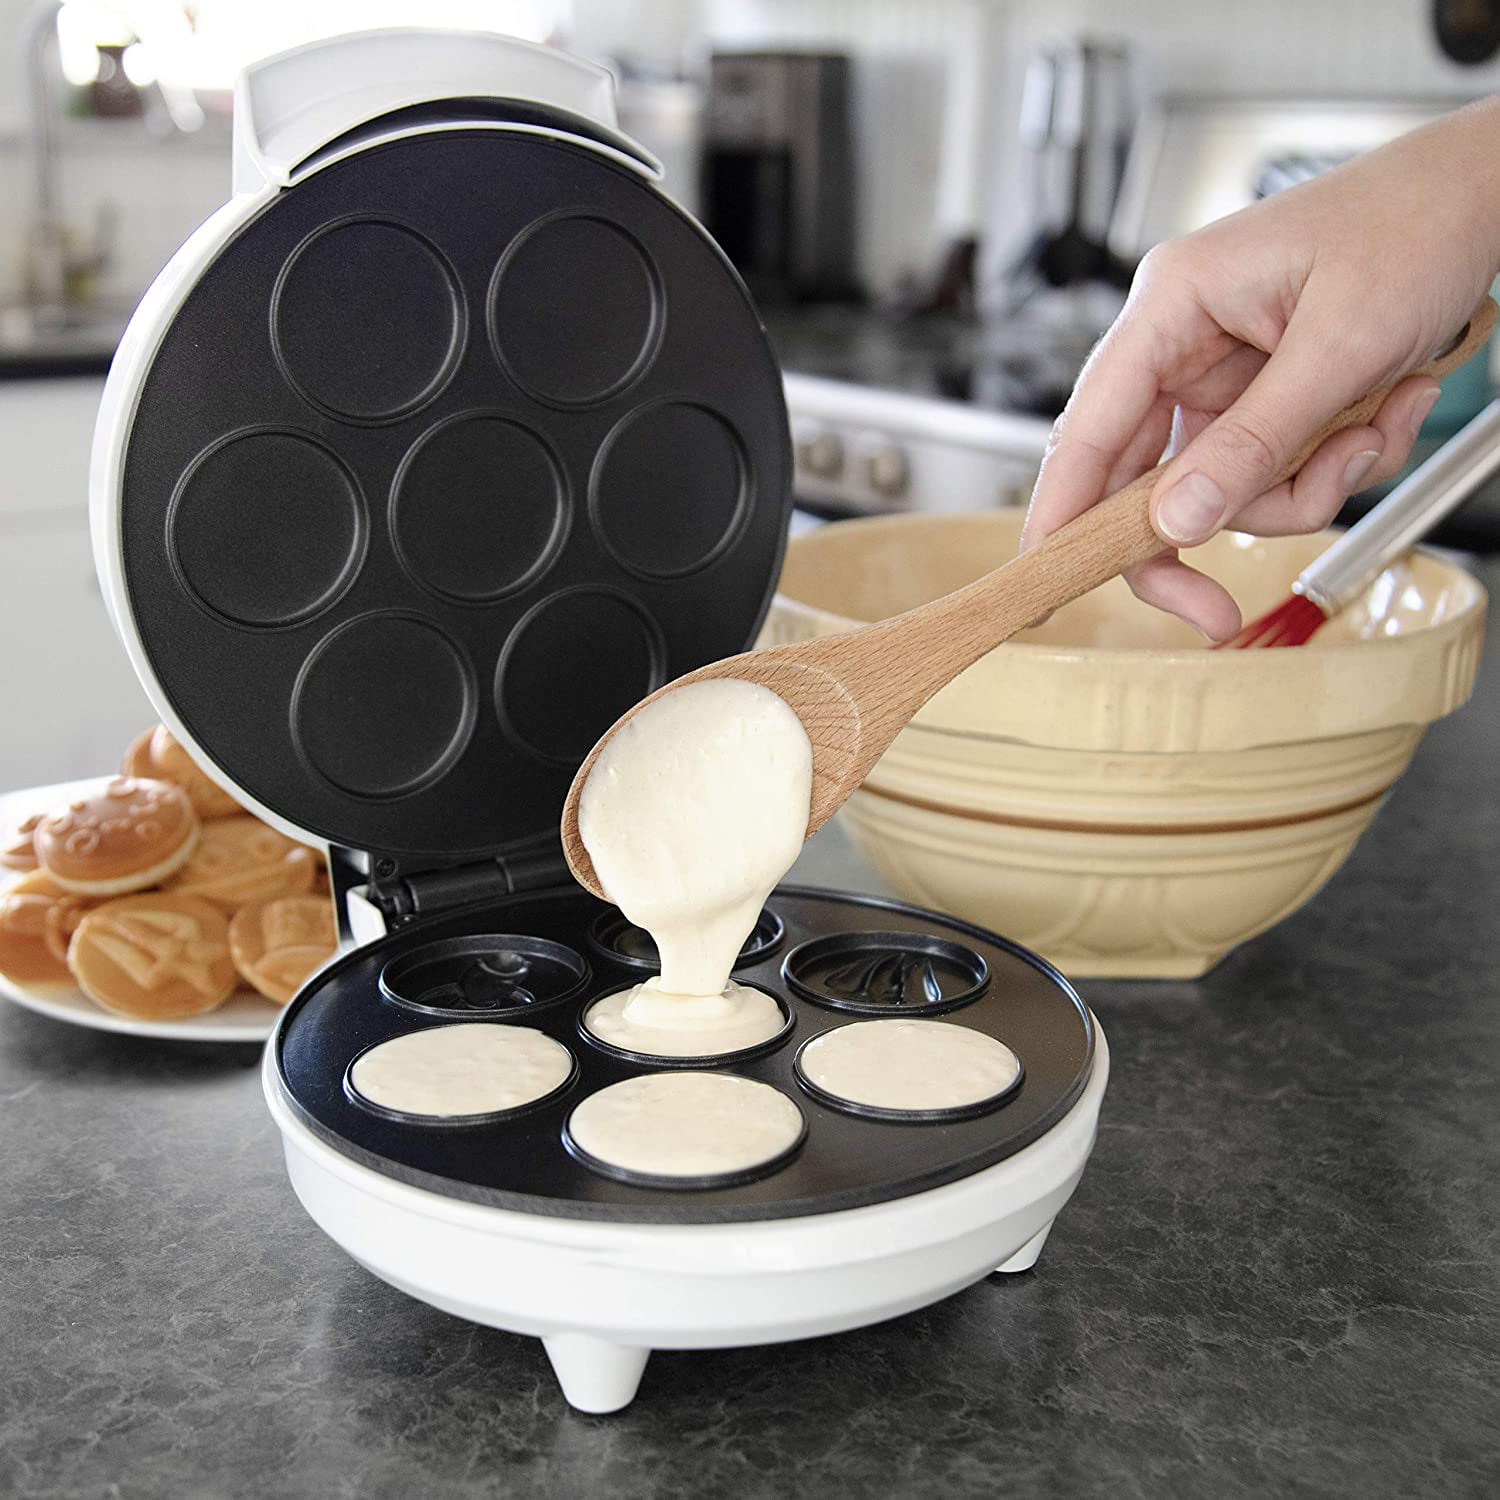 The Original Creepy Crawly Bug Waffle Maker - Make 7 Fun Different Insect Shaped Pancakes Including A Beetle, Lady Bug, Bee & More- Electric